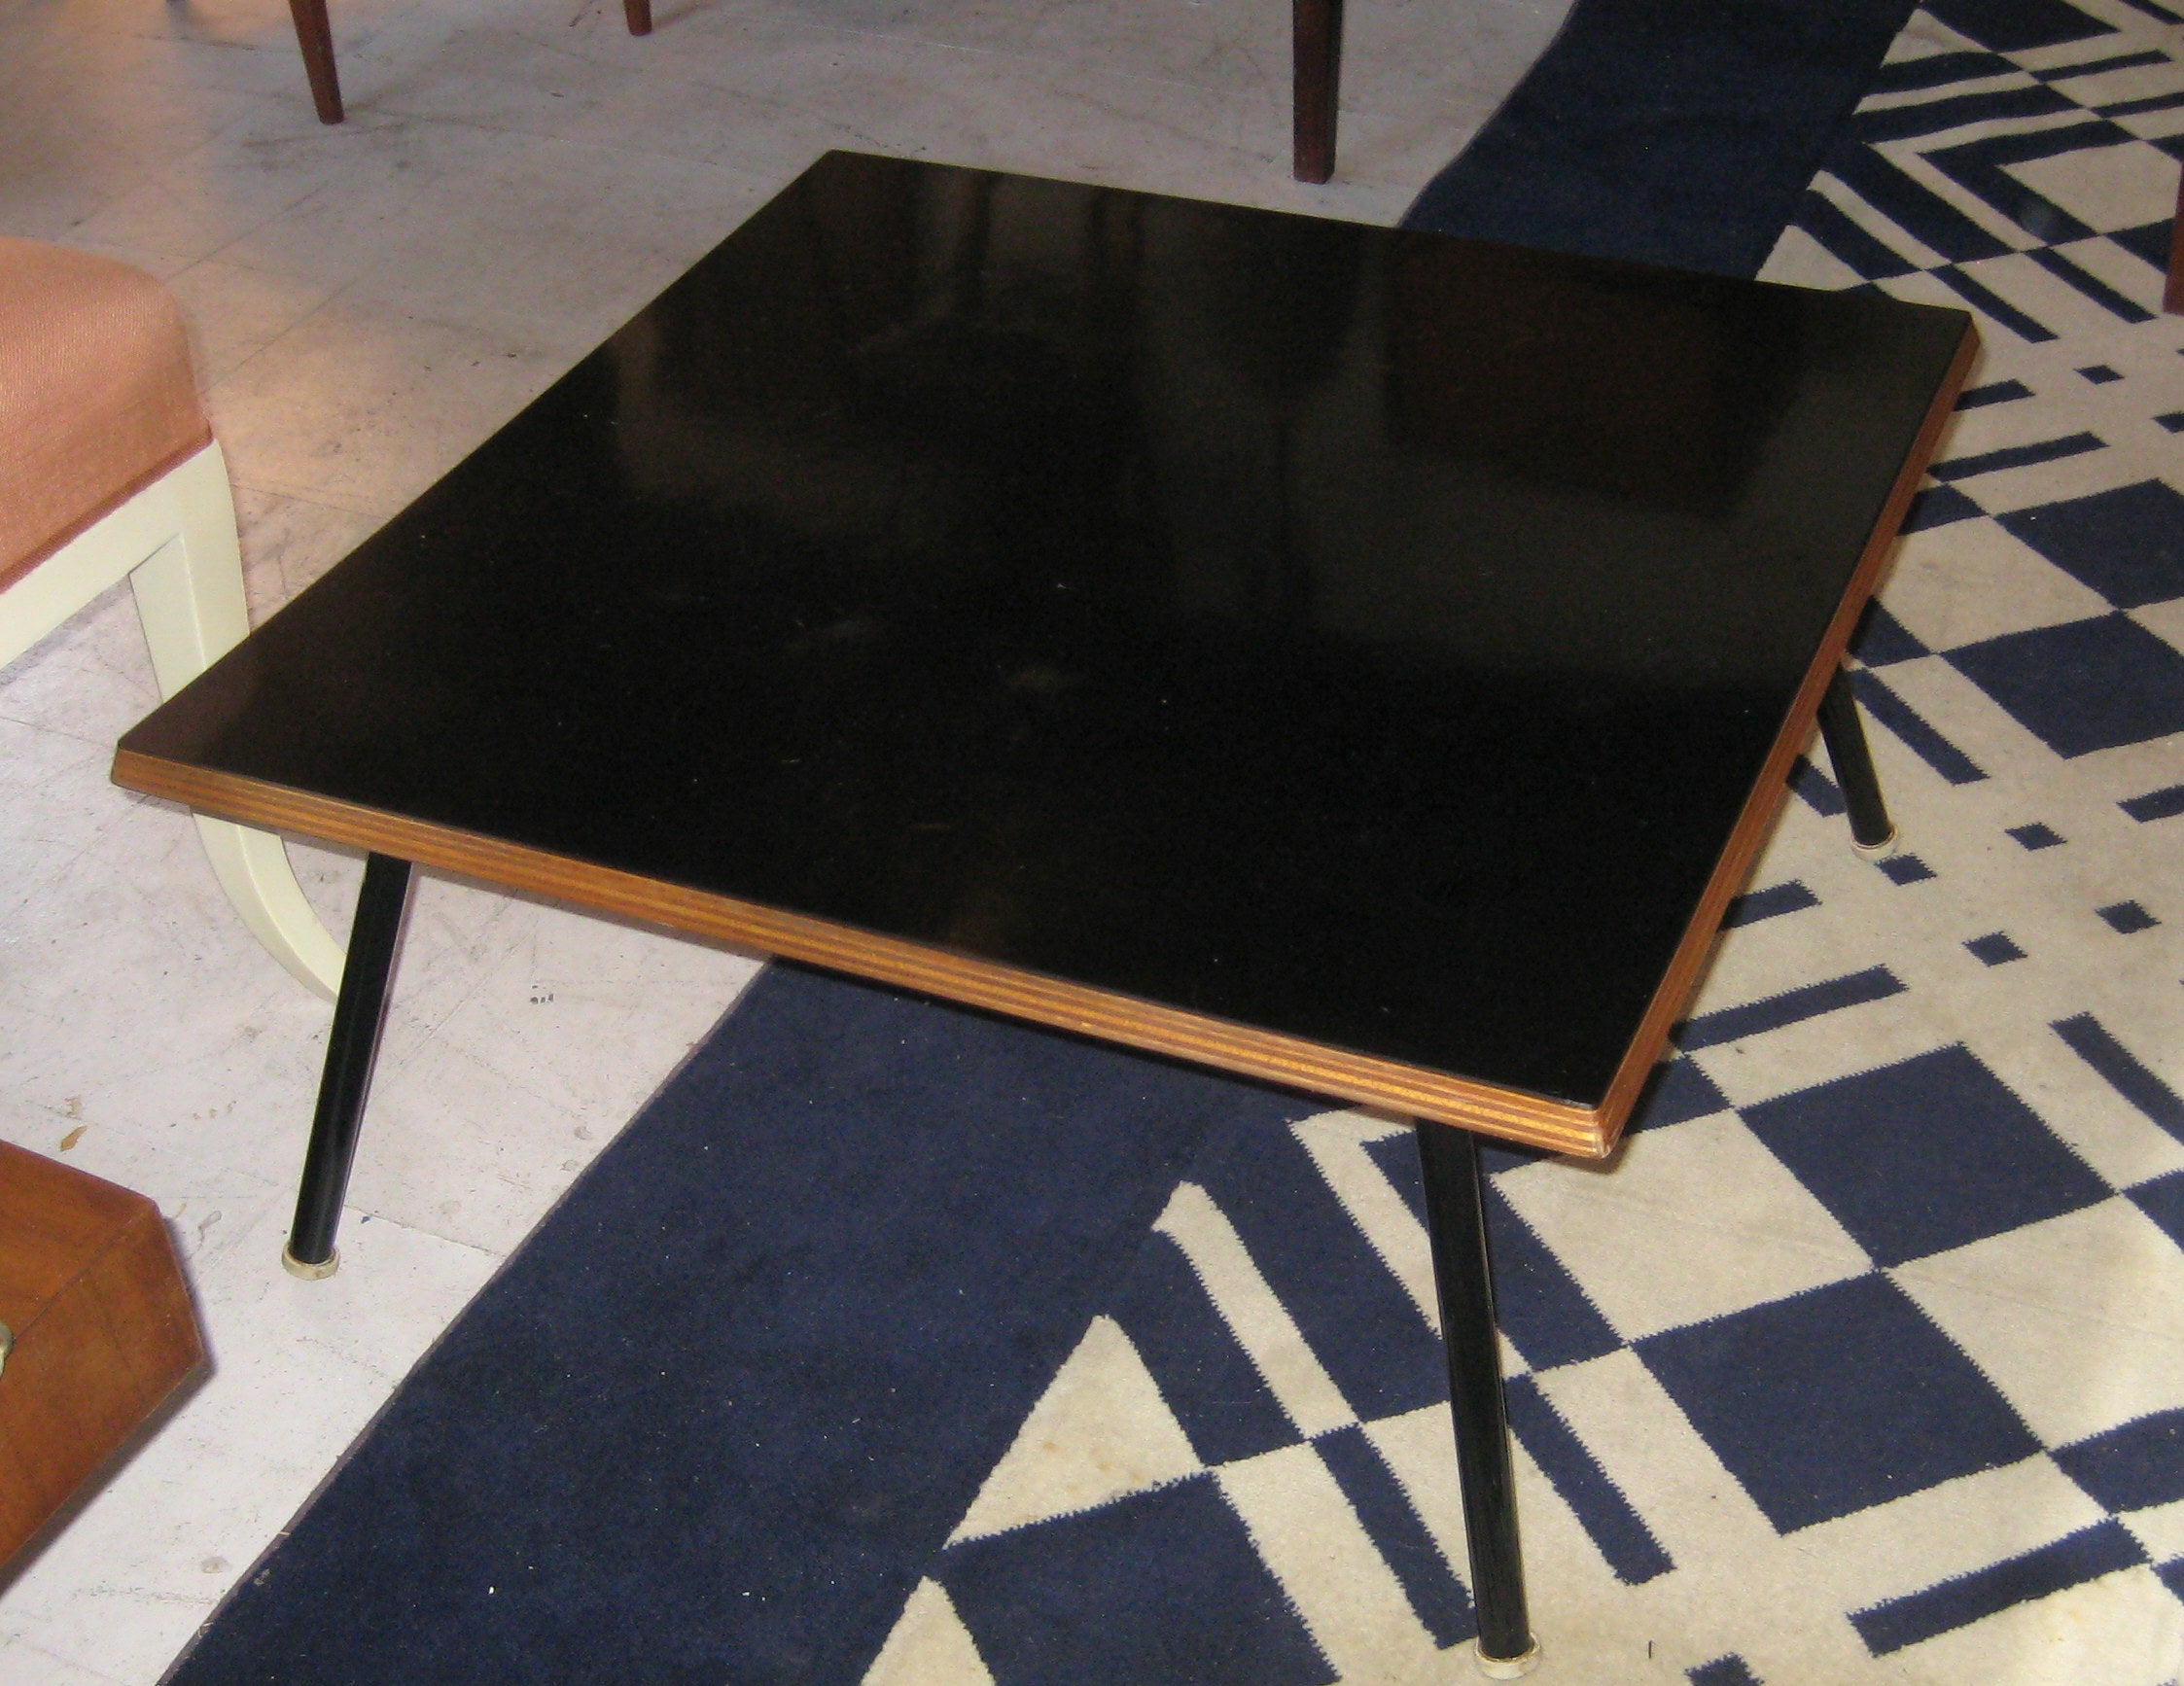 Charlotte Perriand "Tunisie" Table